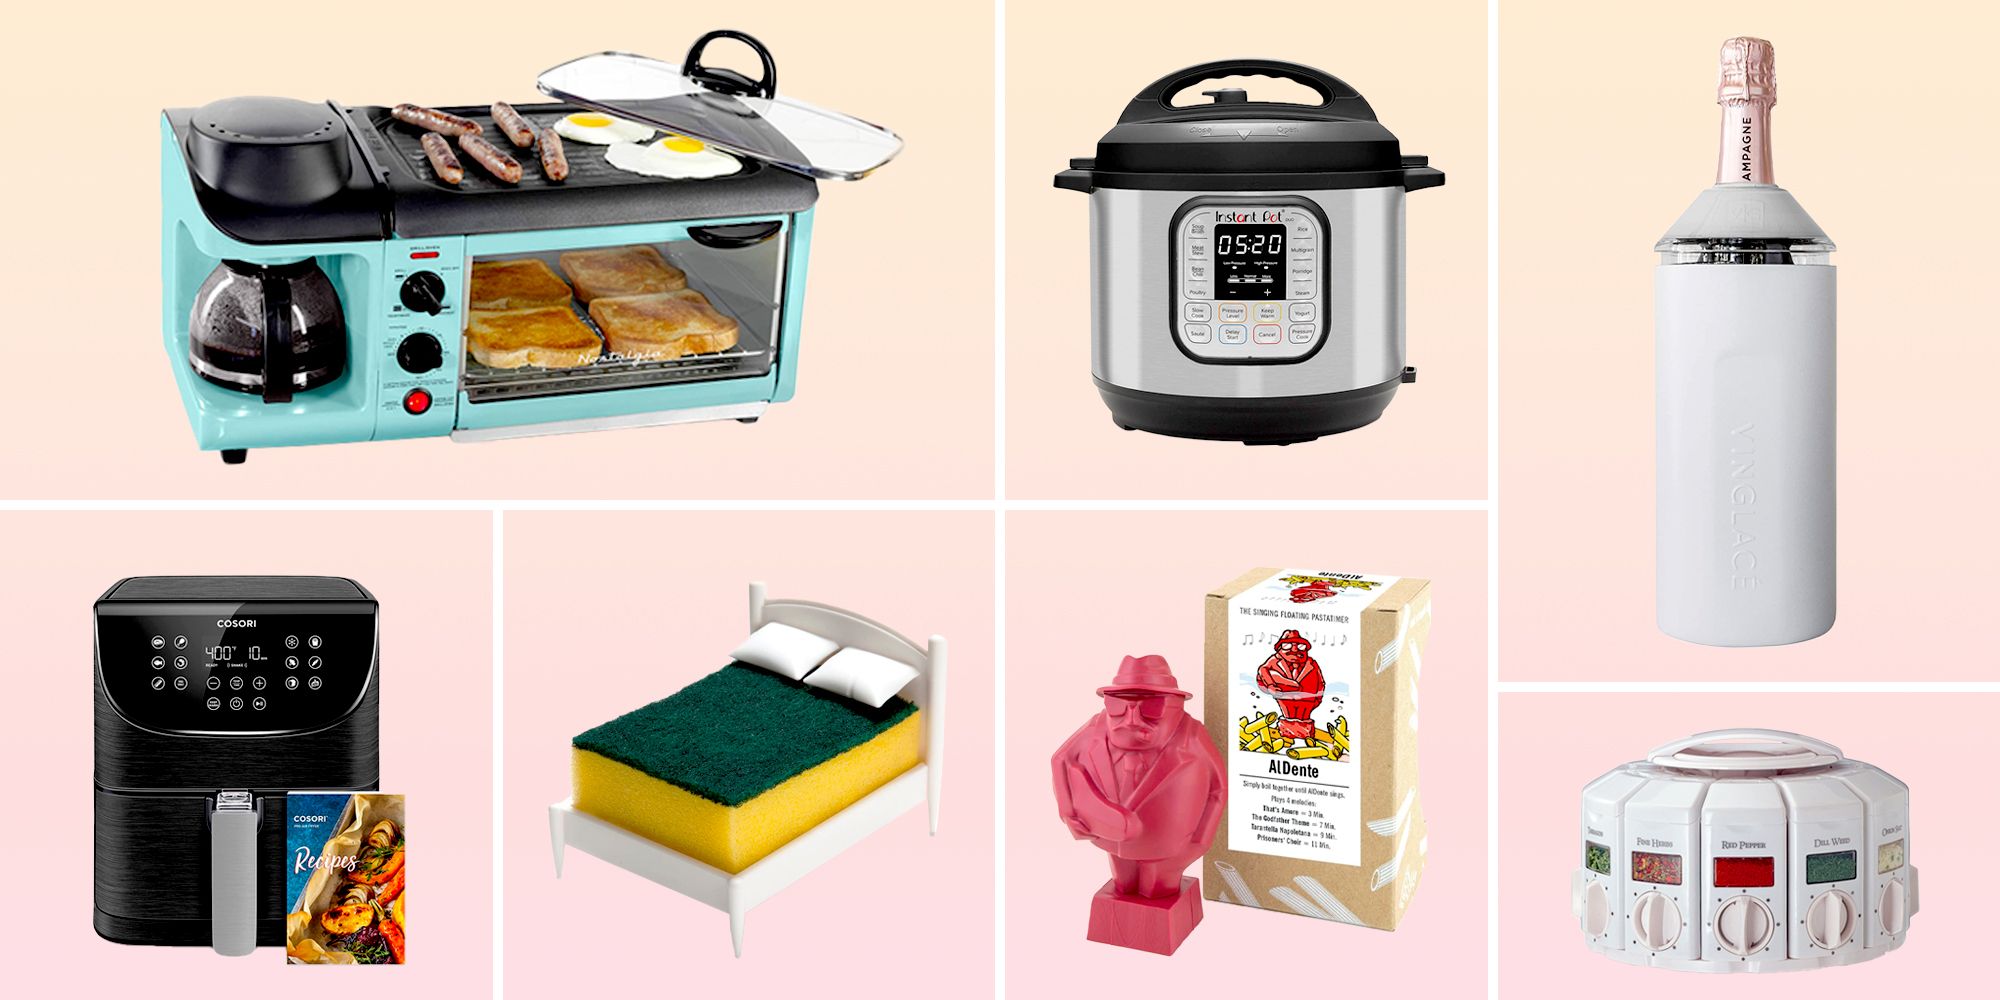 15 Kitchen Appliances That Make For Great Marriage Gifts - User's blog